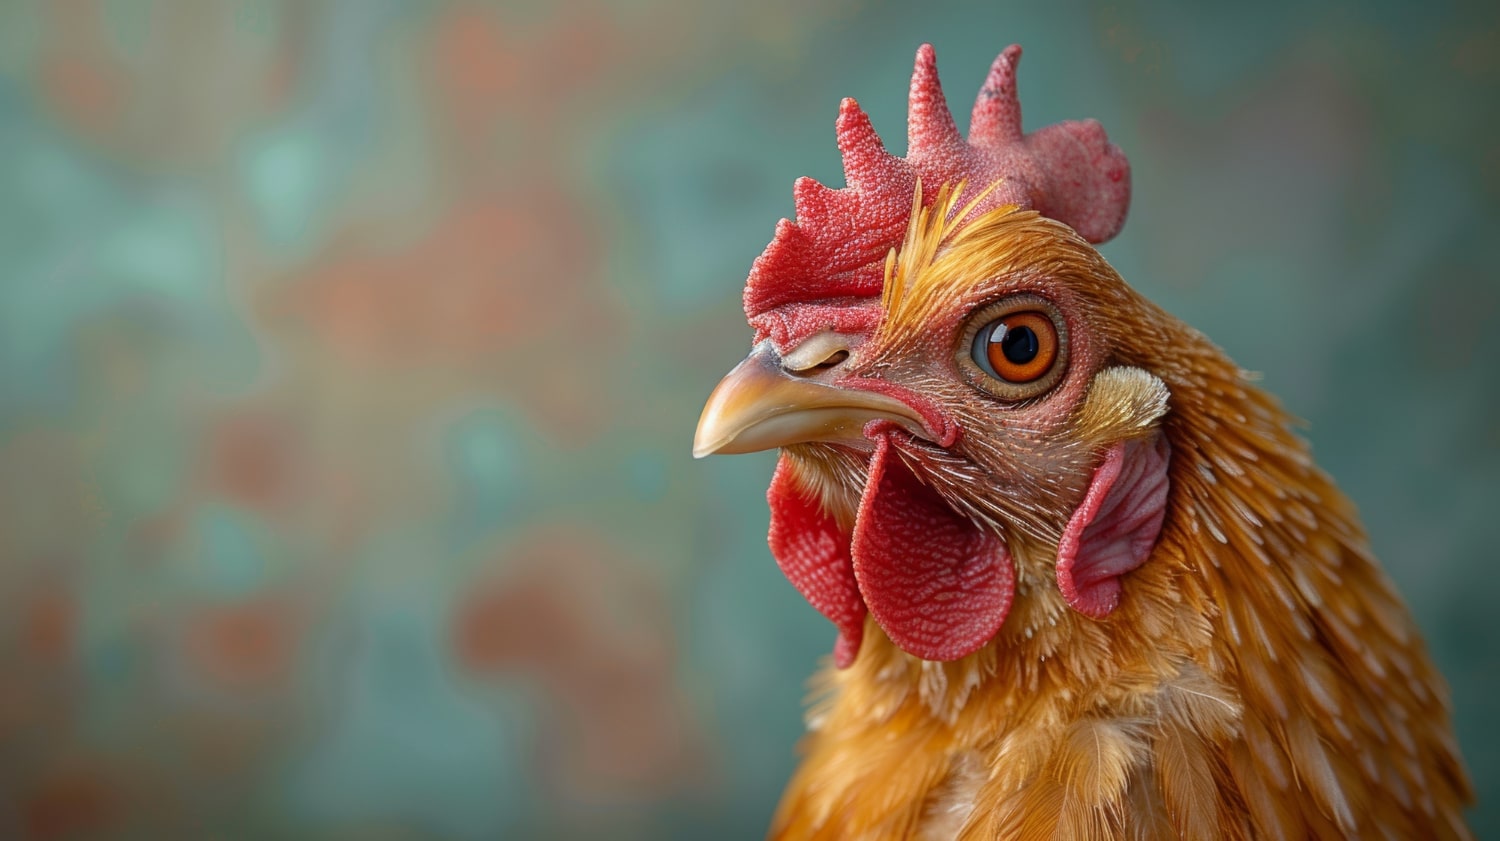 Hens blush when they are scared or excited